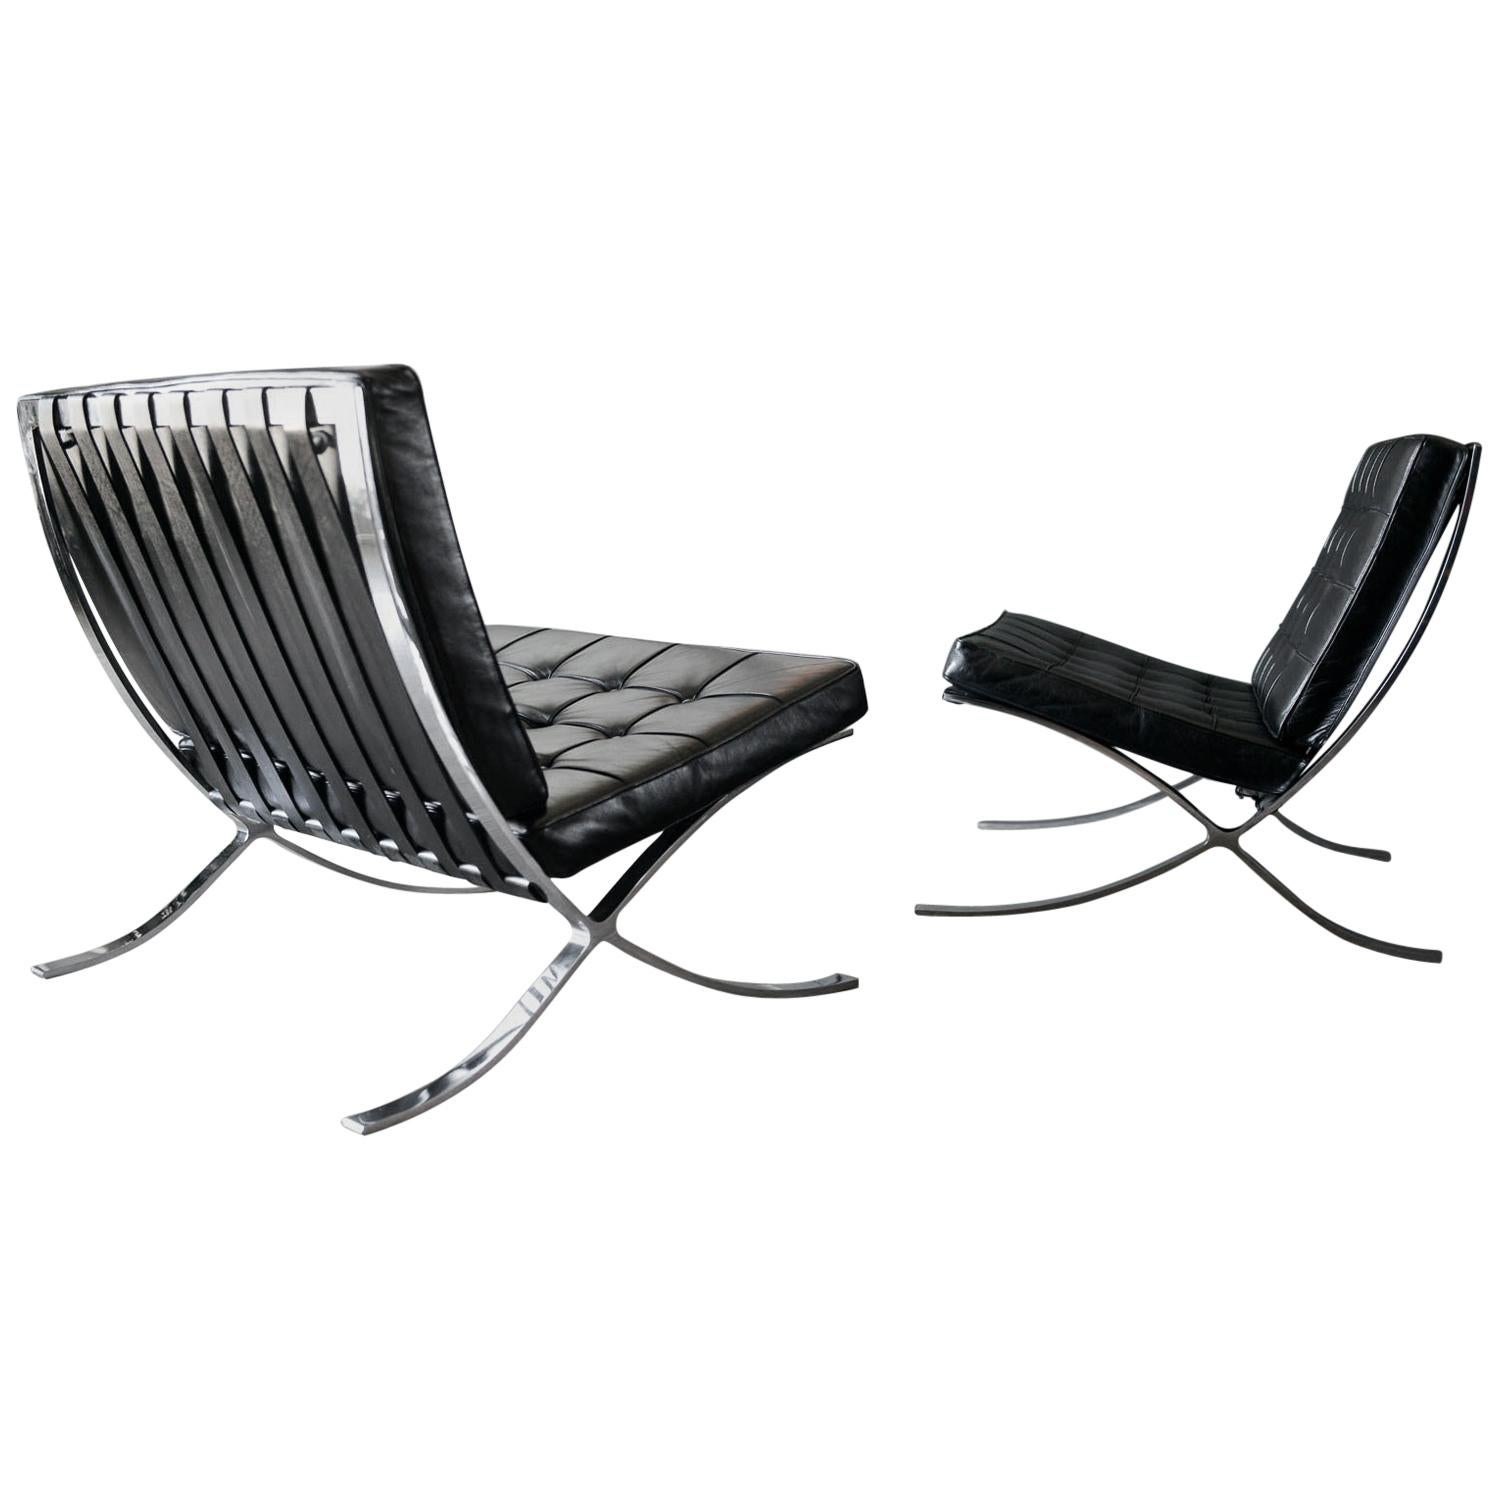 Pair of Original Mies Van Der Rohe Barcelona Chairs with Ottoman for Knoll